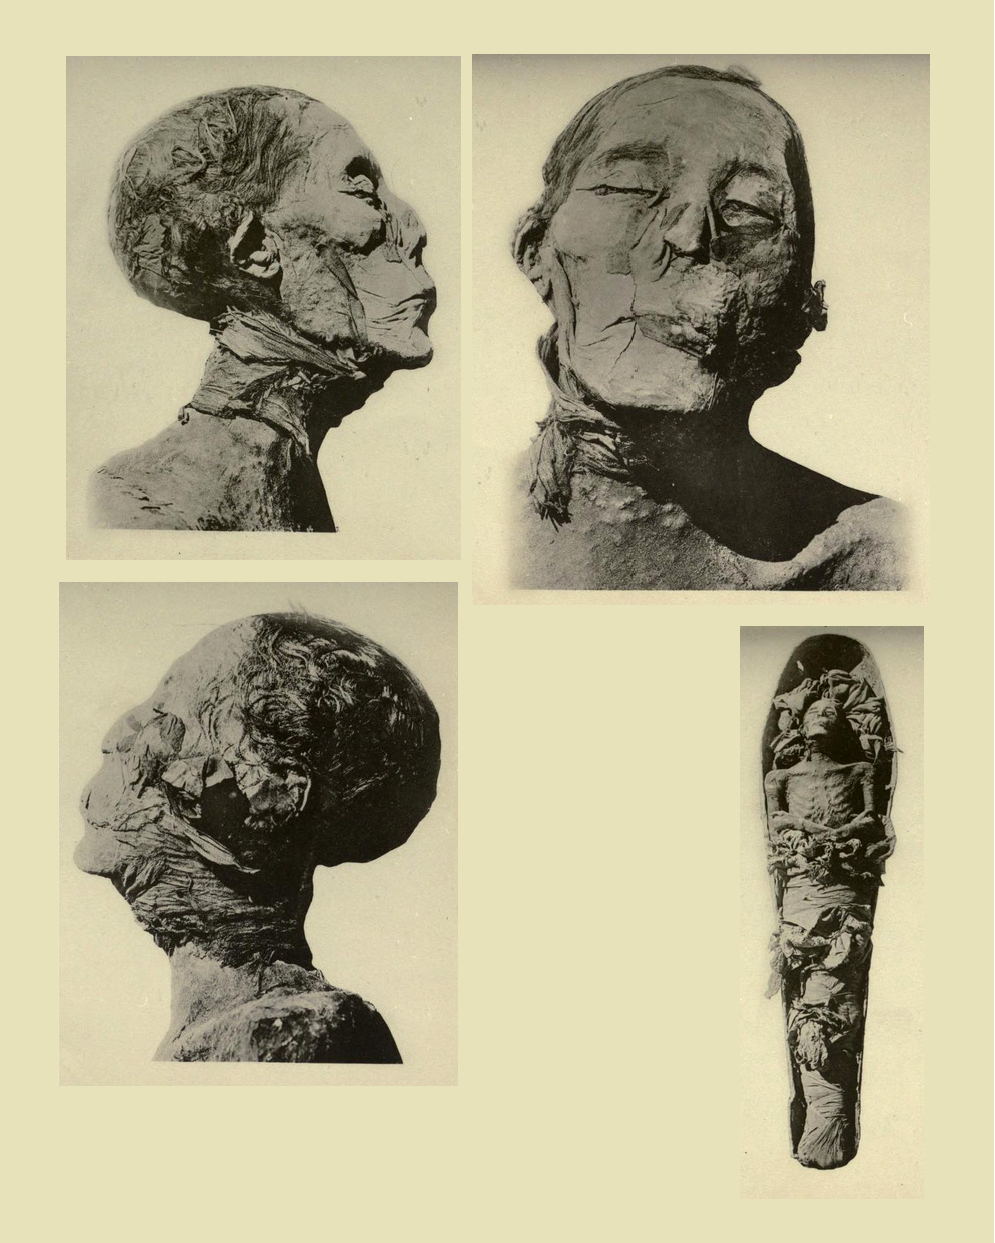 The mummified remains of king amenhotep ii found in tomb kv35 photographed in 1902